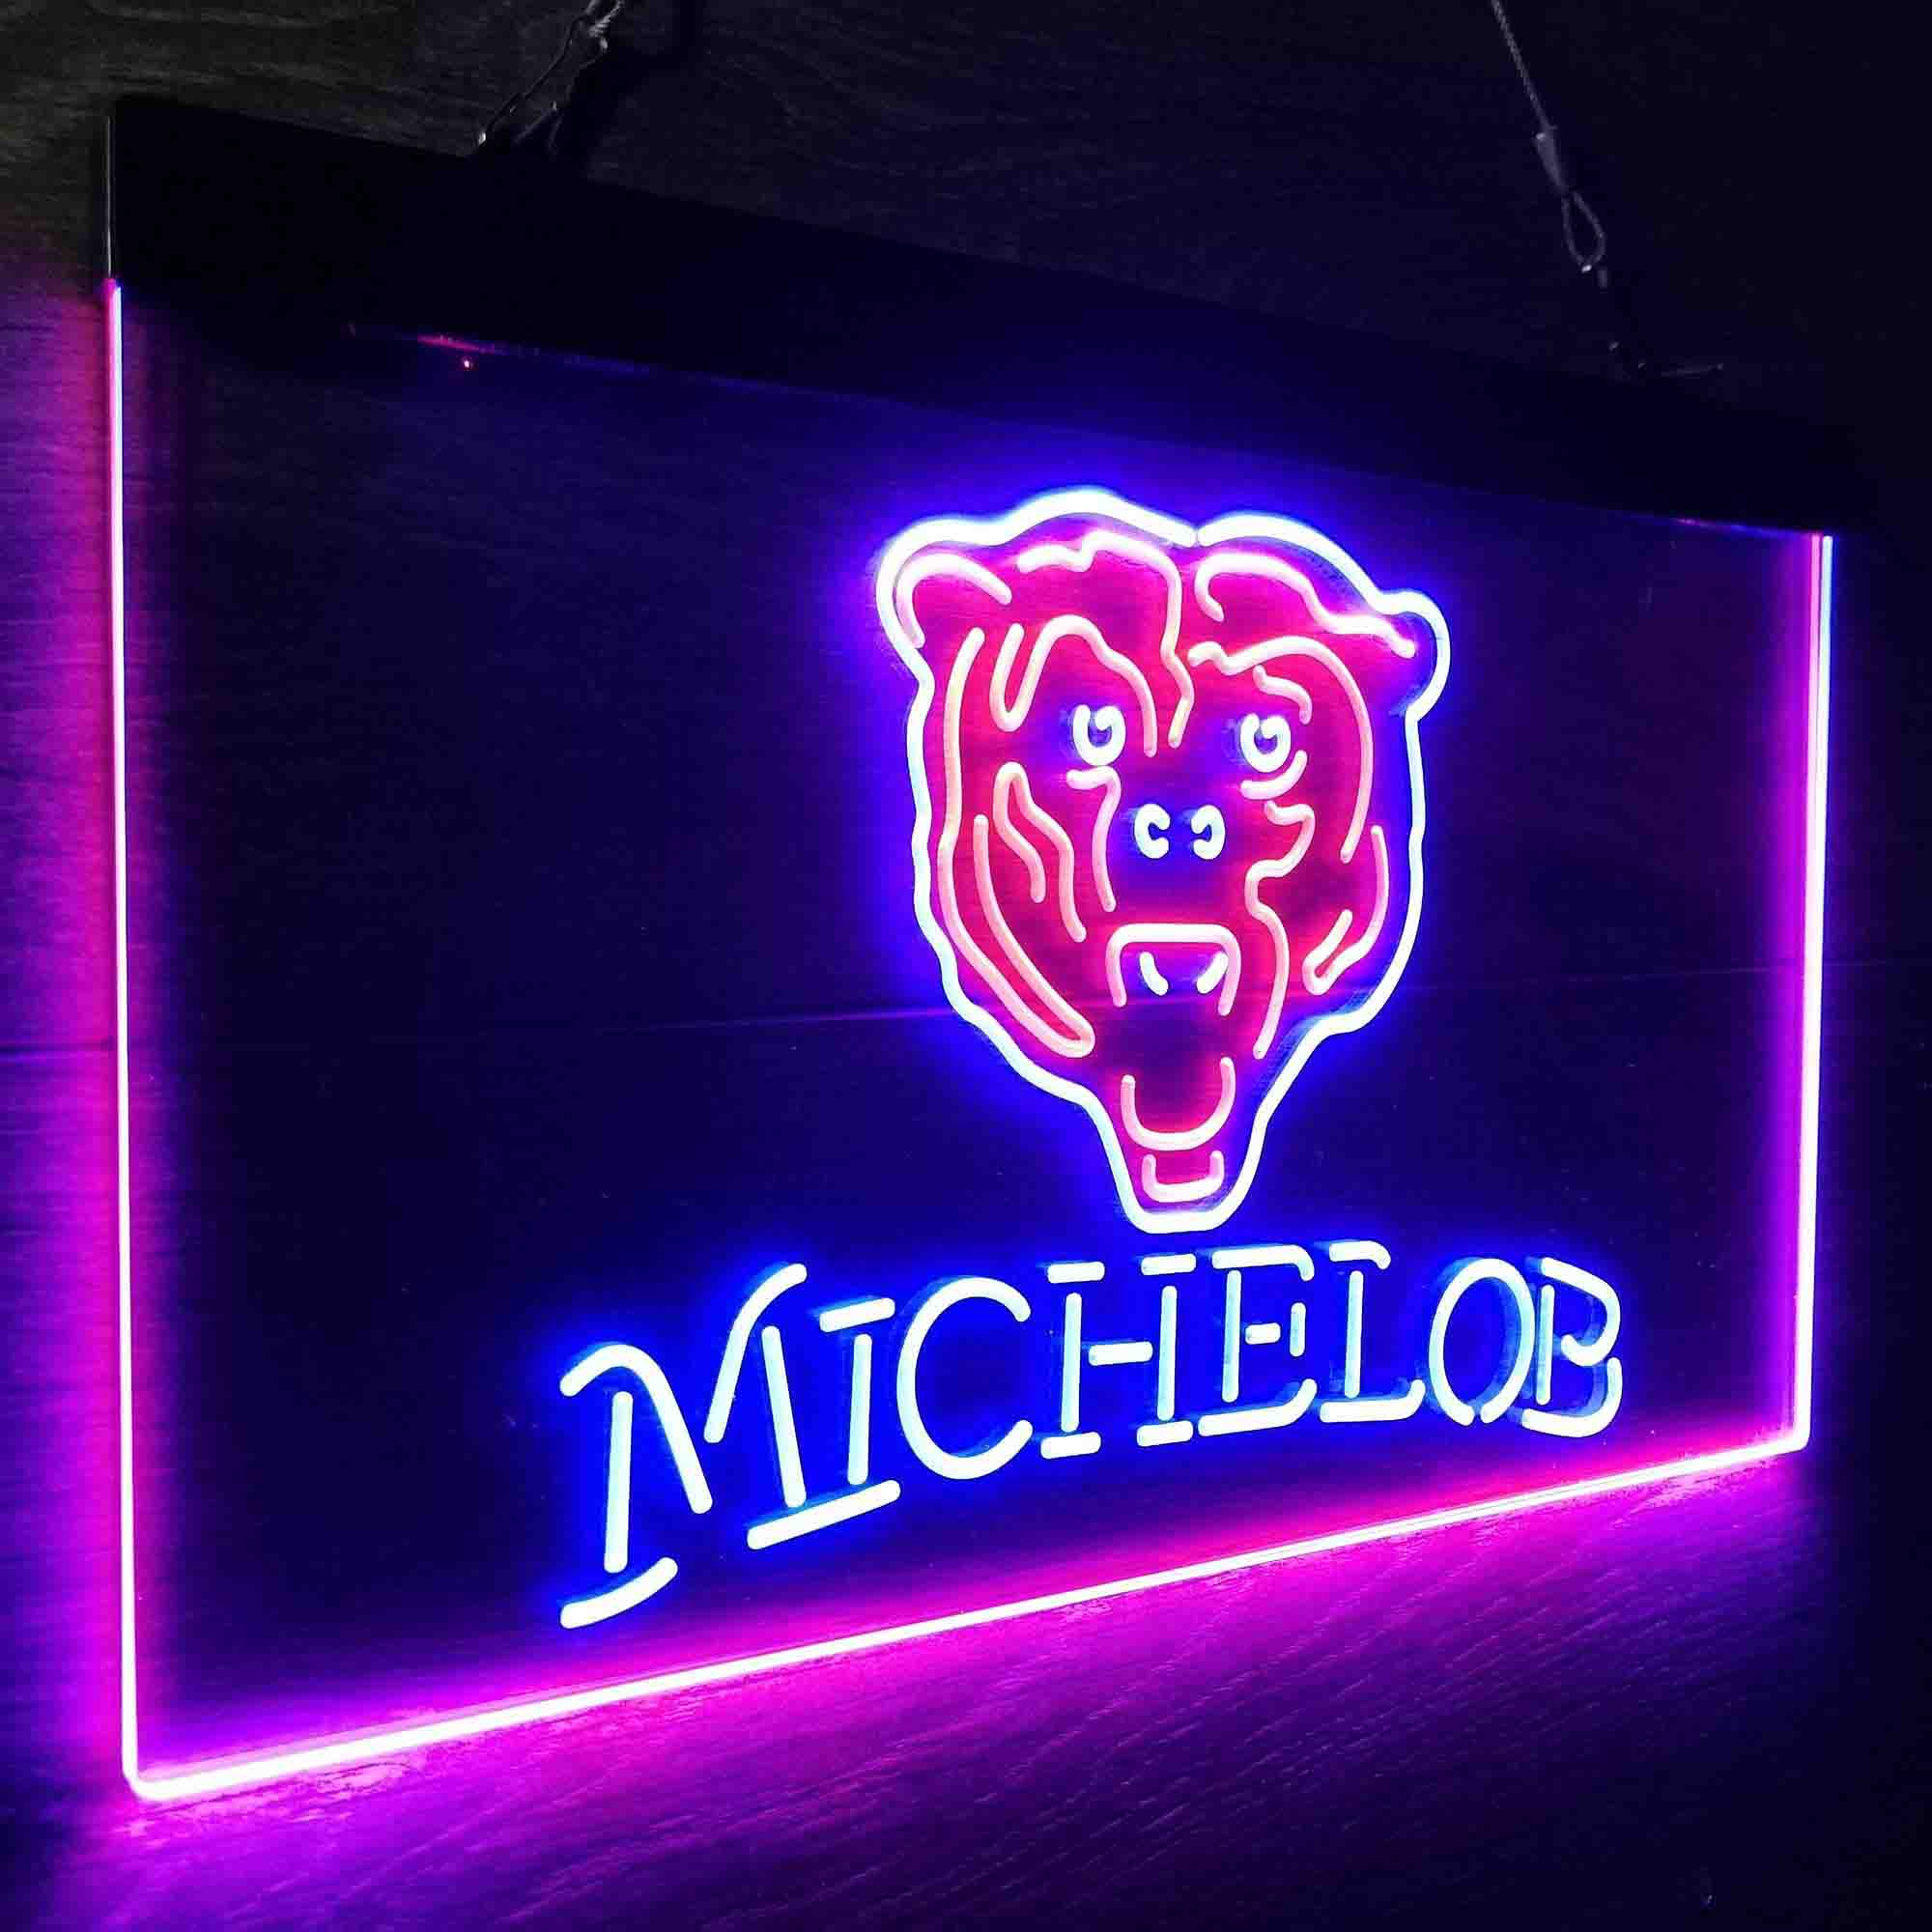 Michelob Bar Chicago Bears Est. 1920 LED Neon Sign